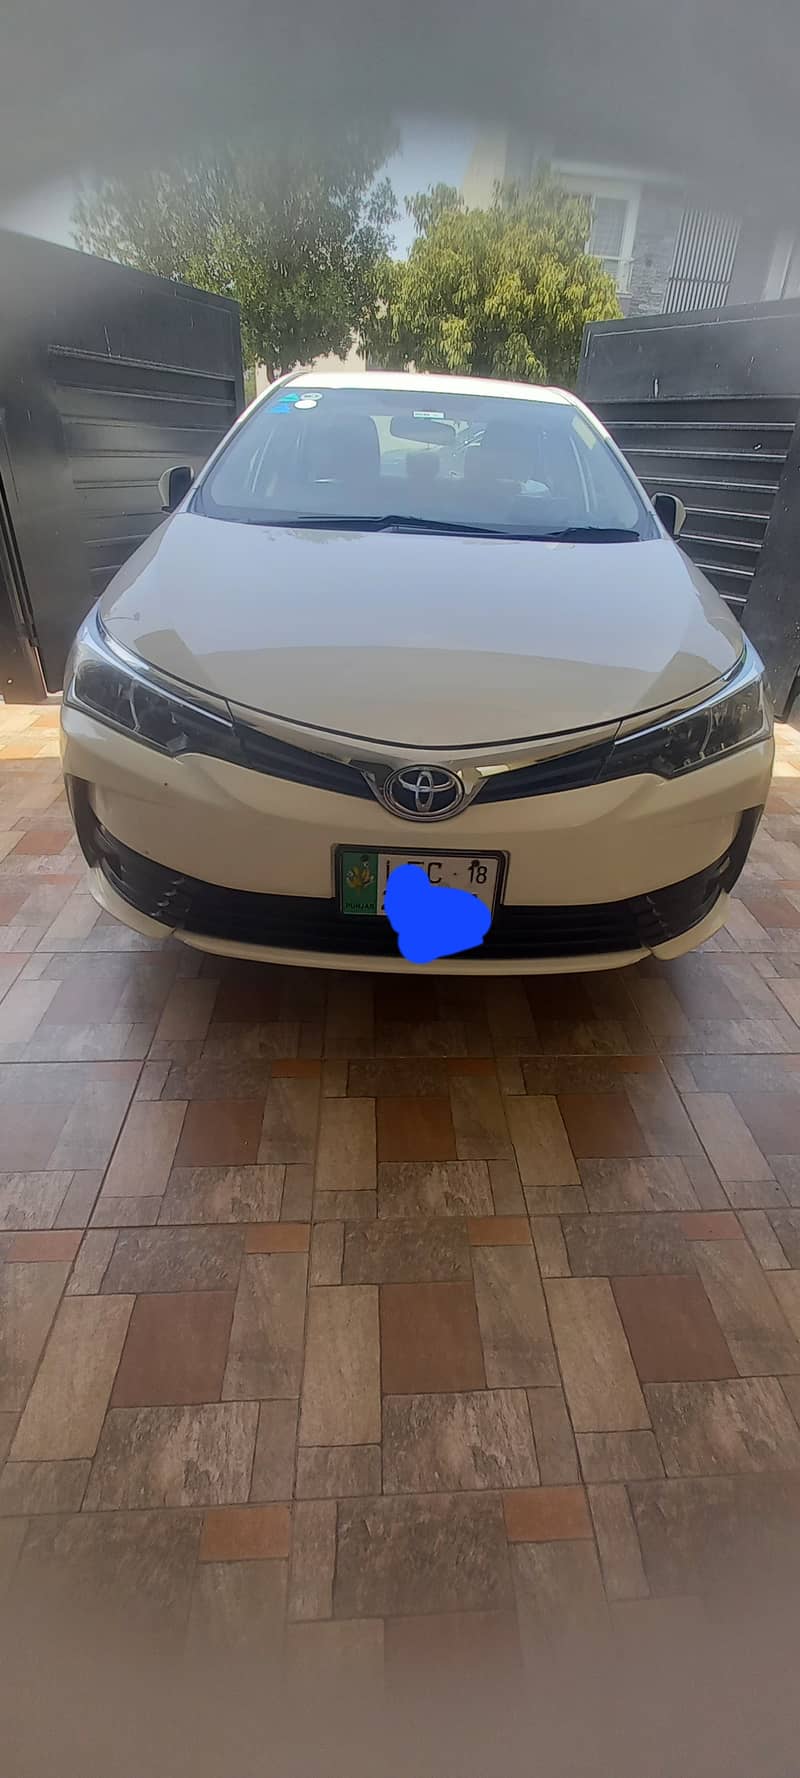 Toyota car for sale 2